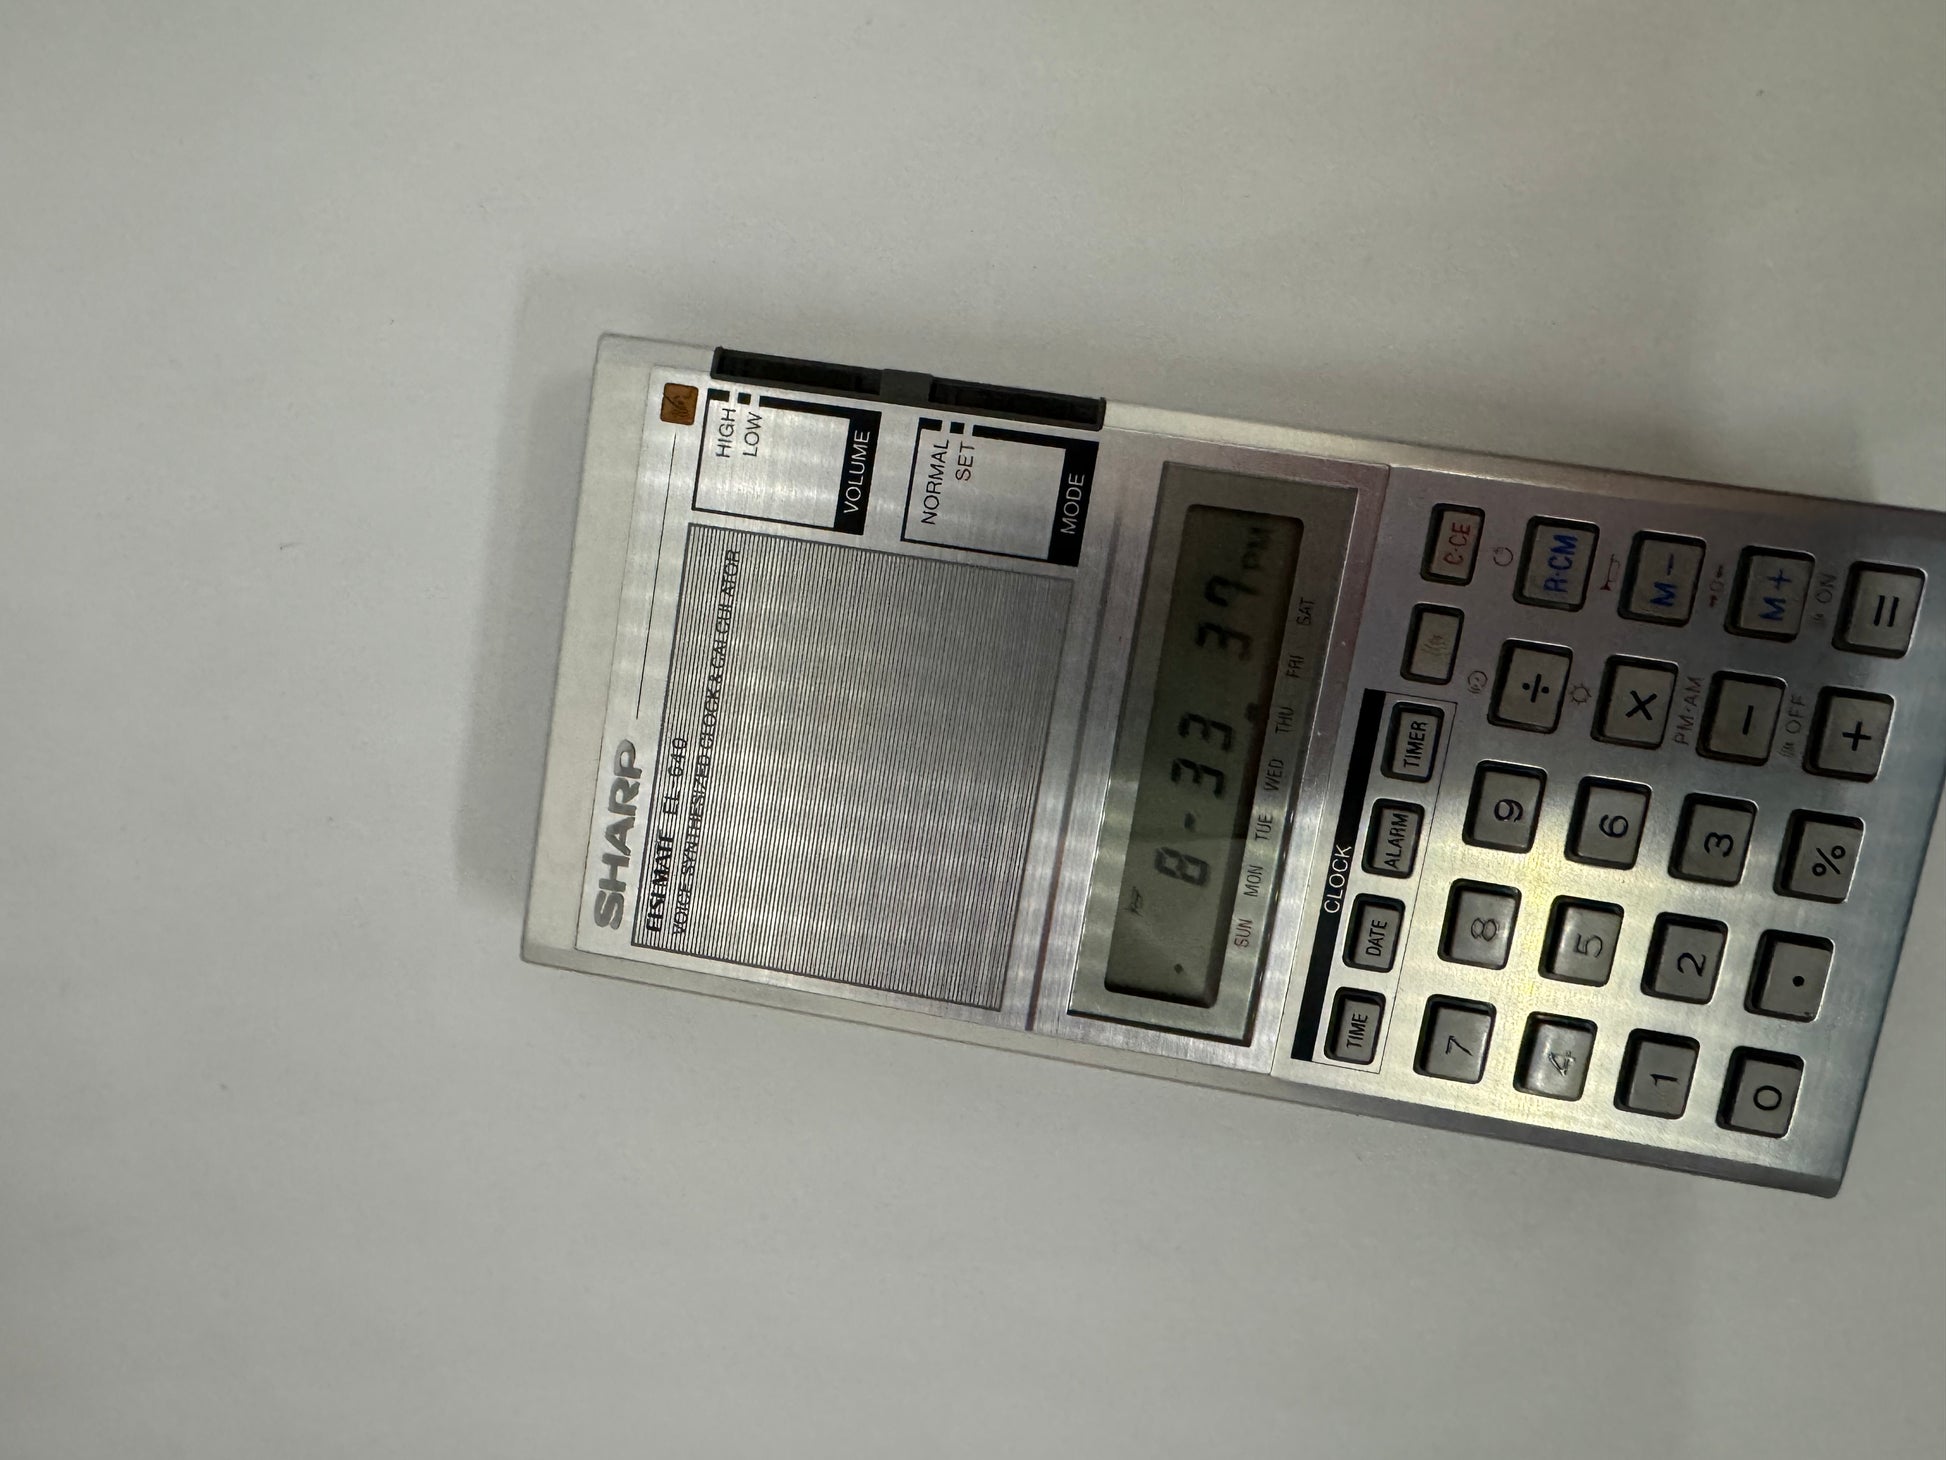 The picture shows a Sharp brand calculator. The calculator is silver and has a rectangular shape. On the left side, there is a speaker grill and above it, there is a switch labeled "Volume" with options "High" and "Low". The brand name "Sharp" is written below the speaker grill. On the right side of the calculator, there is a display screen showing some numbers and letters. Below the screen, there is a set of buttons including numbers 0-9, mathematical operation buttons such as plus, minus, multip